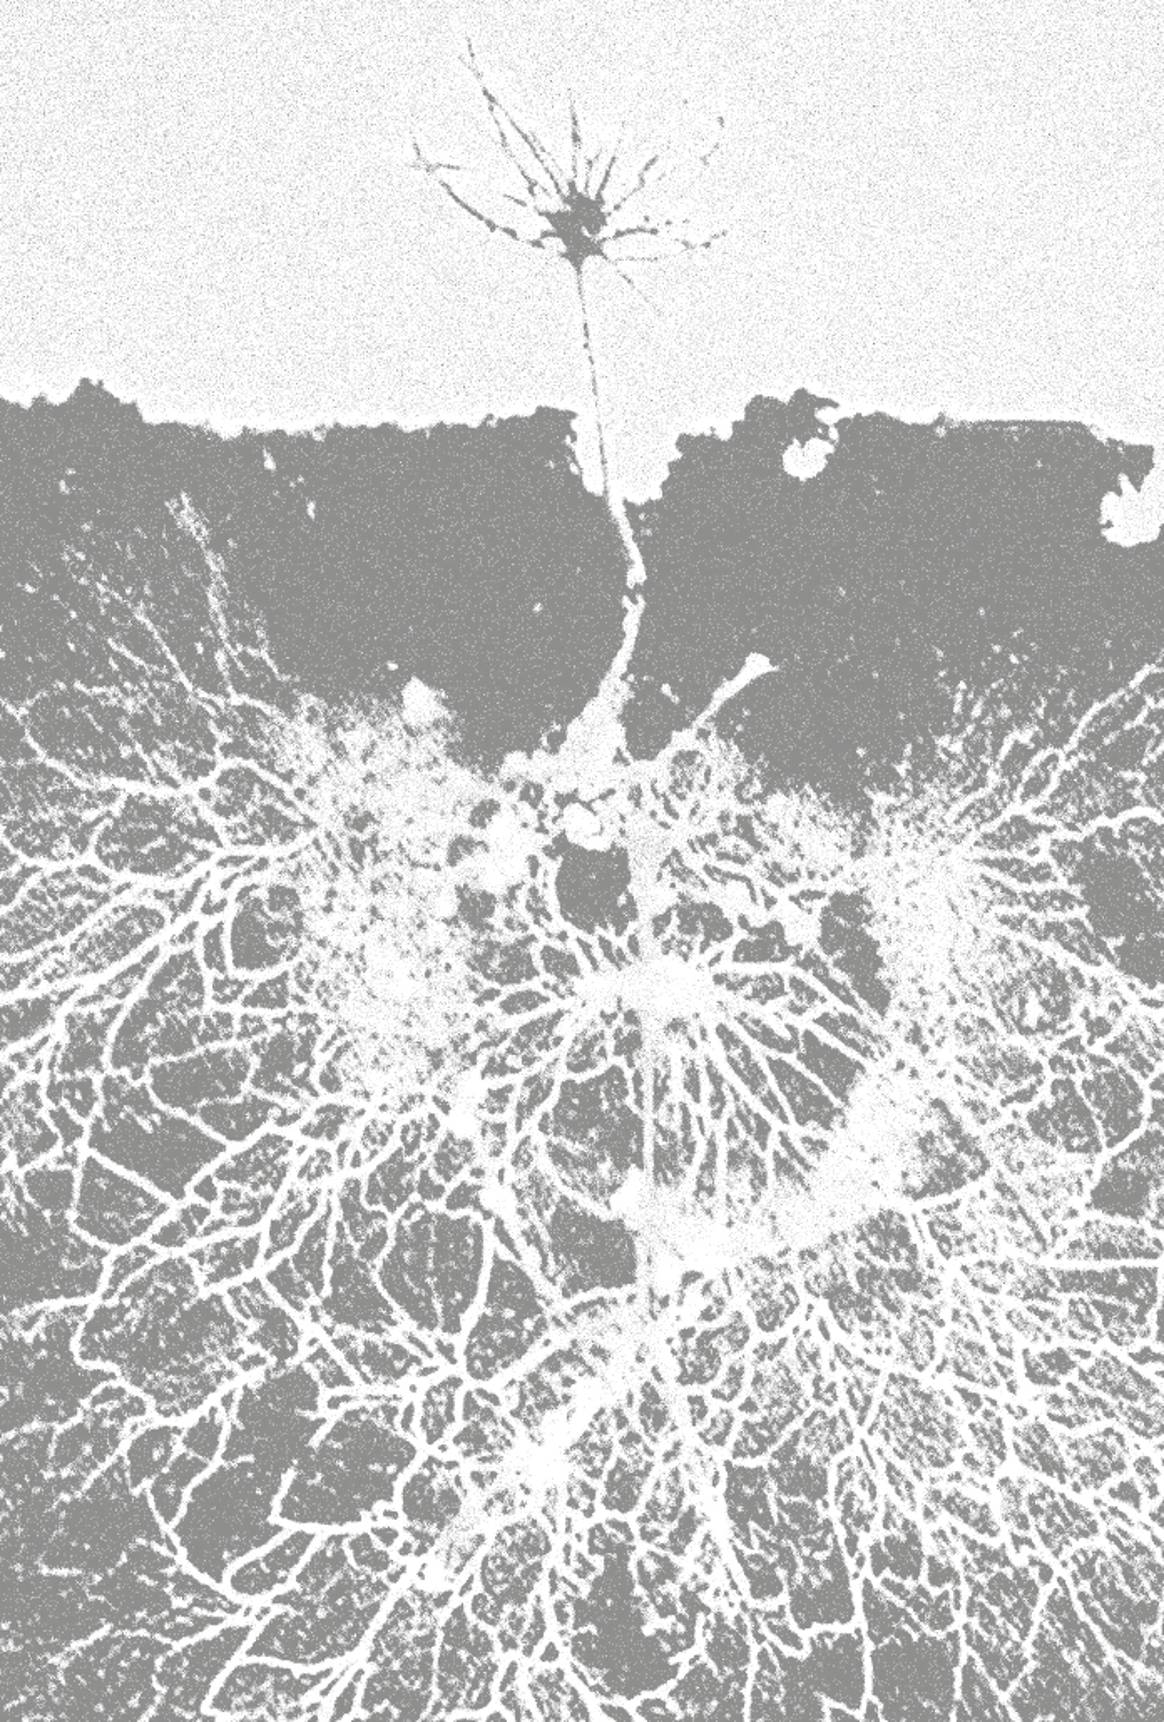 Roots surrounded by mycorrhizal fungal threads. Image edit by Pernille Winther, ArtEZ.